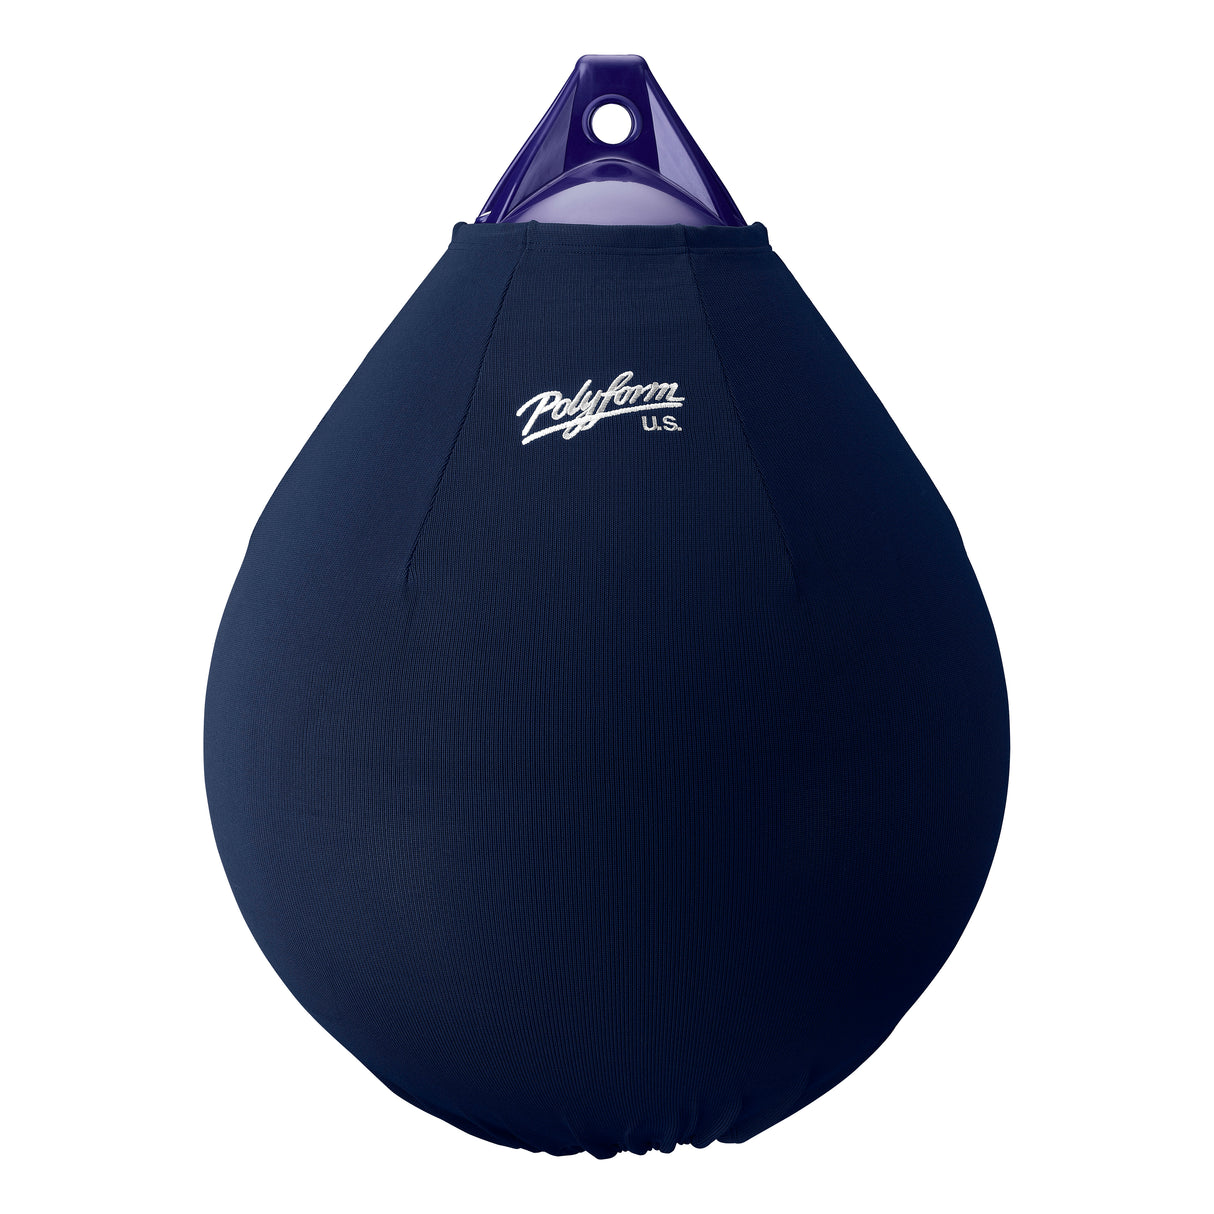 Fishing buoy cover on inflatable buoy, A5 size